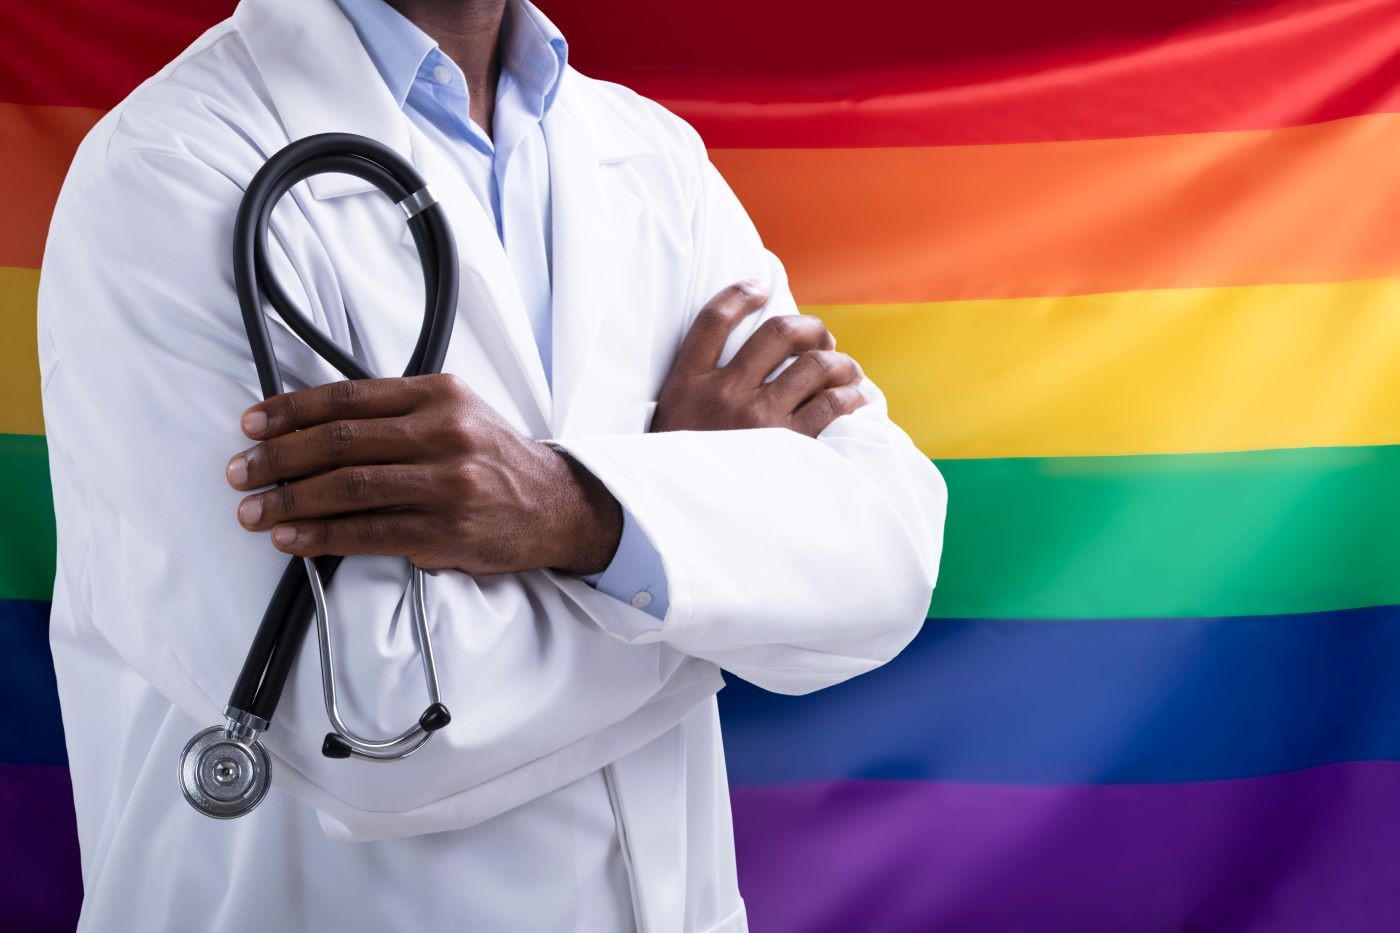 Gender Health Conference Examines Care for LGBTQ+ Population